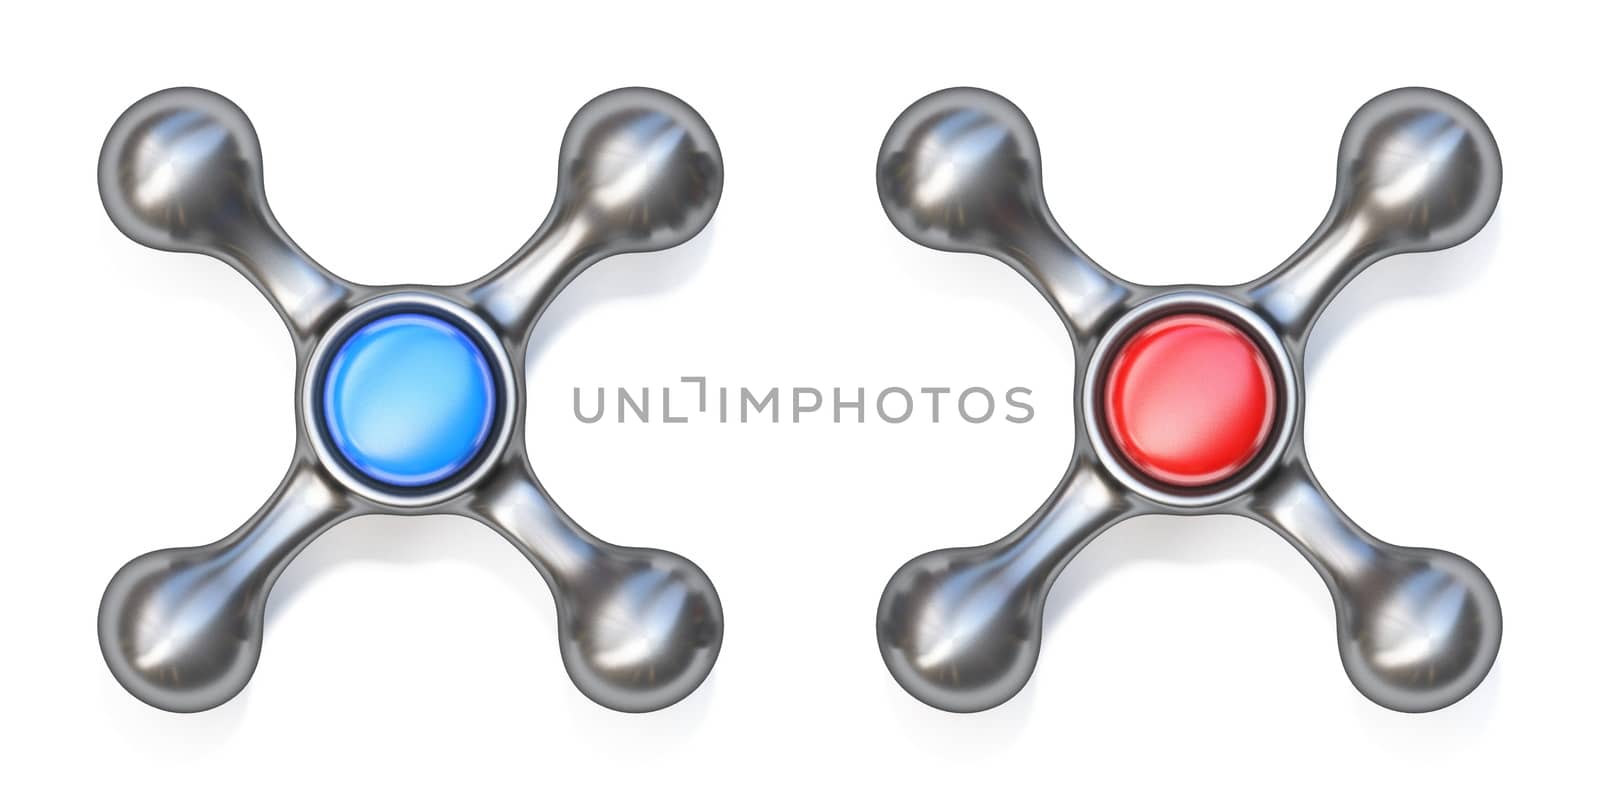 Red and blue water taps 3D render illustration isolated on white background